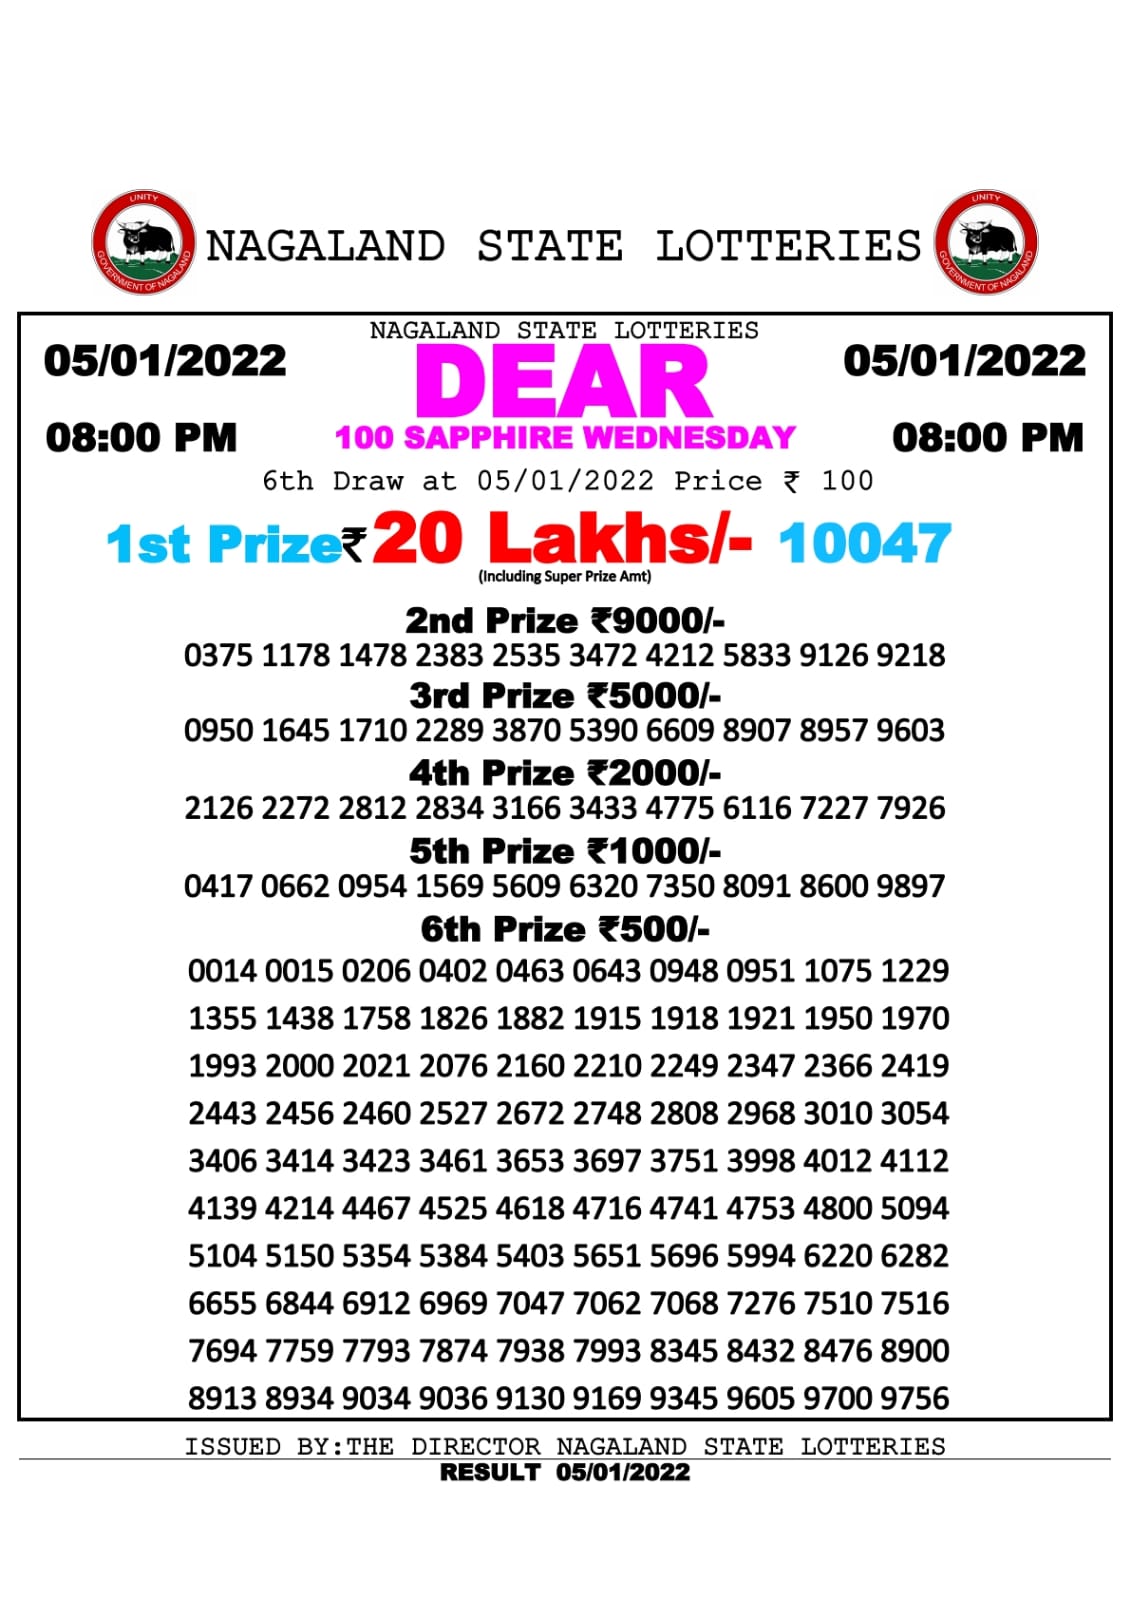 NAGALLAND STATE DEAR 100 WEEKLY LOTTERY 8 pm 04-01-2022